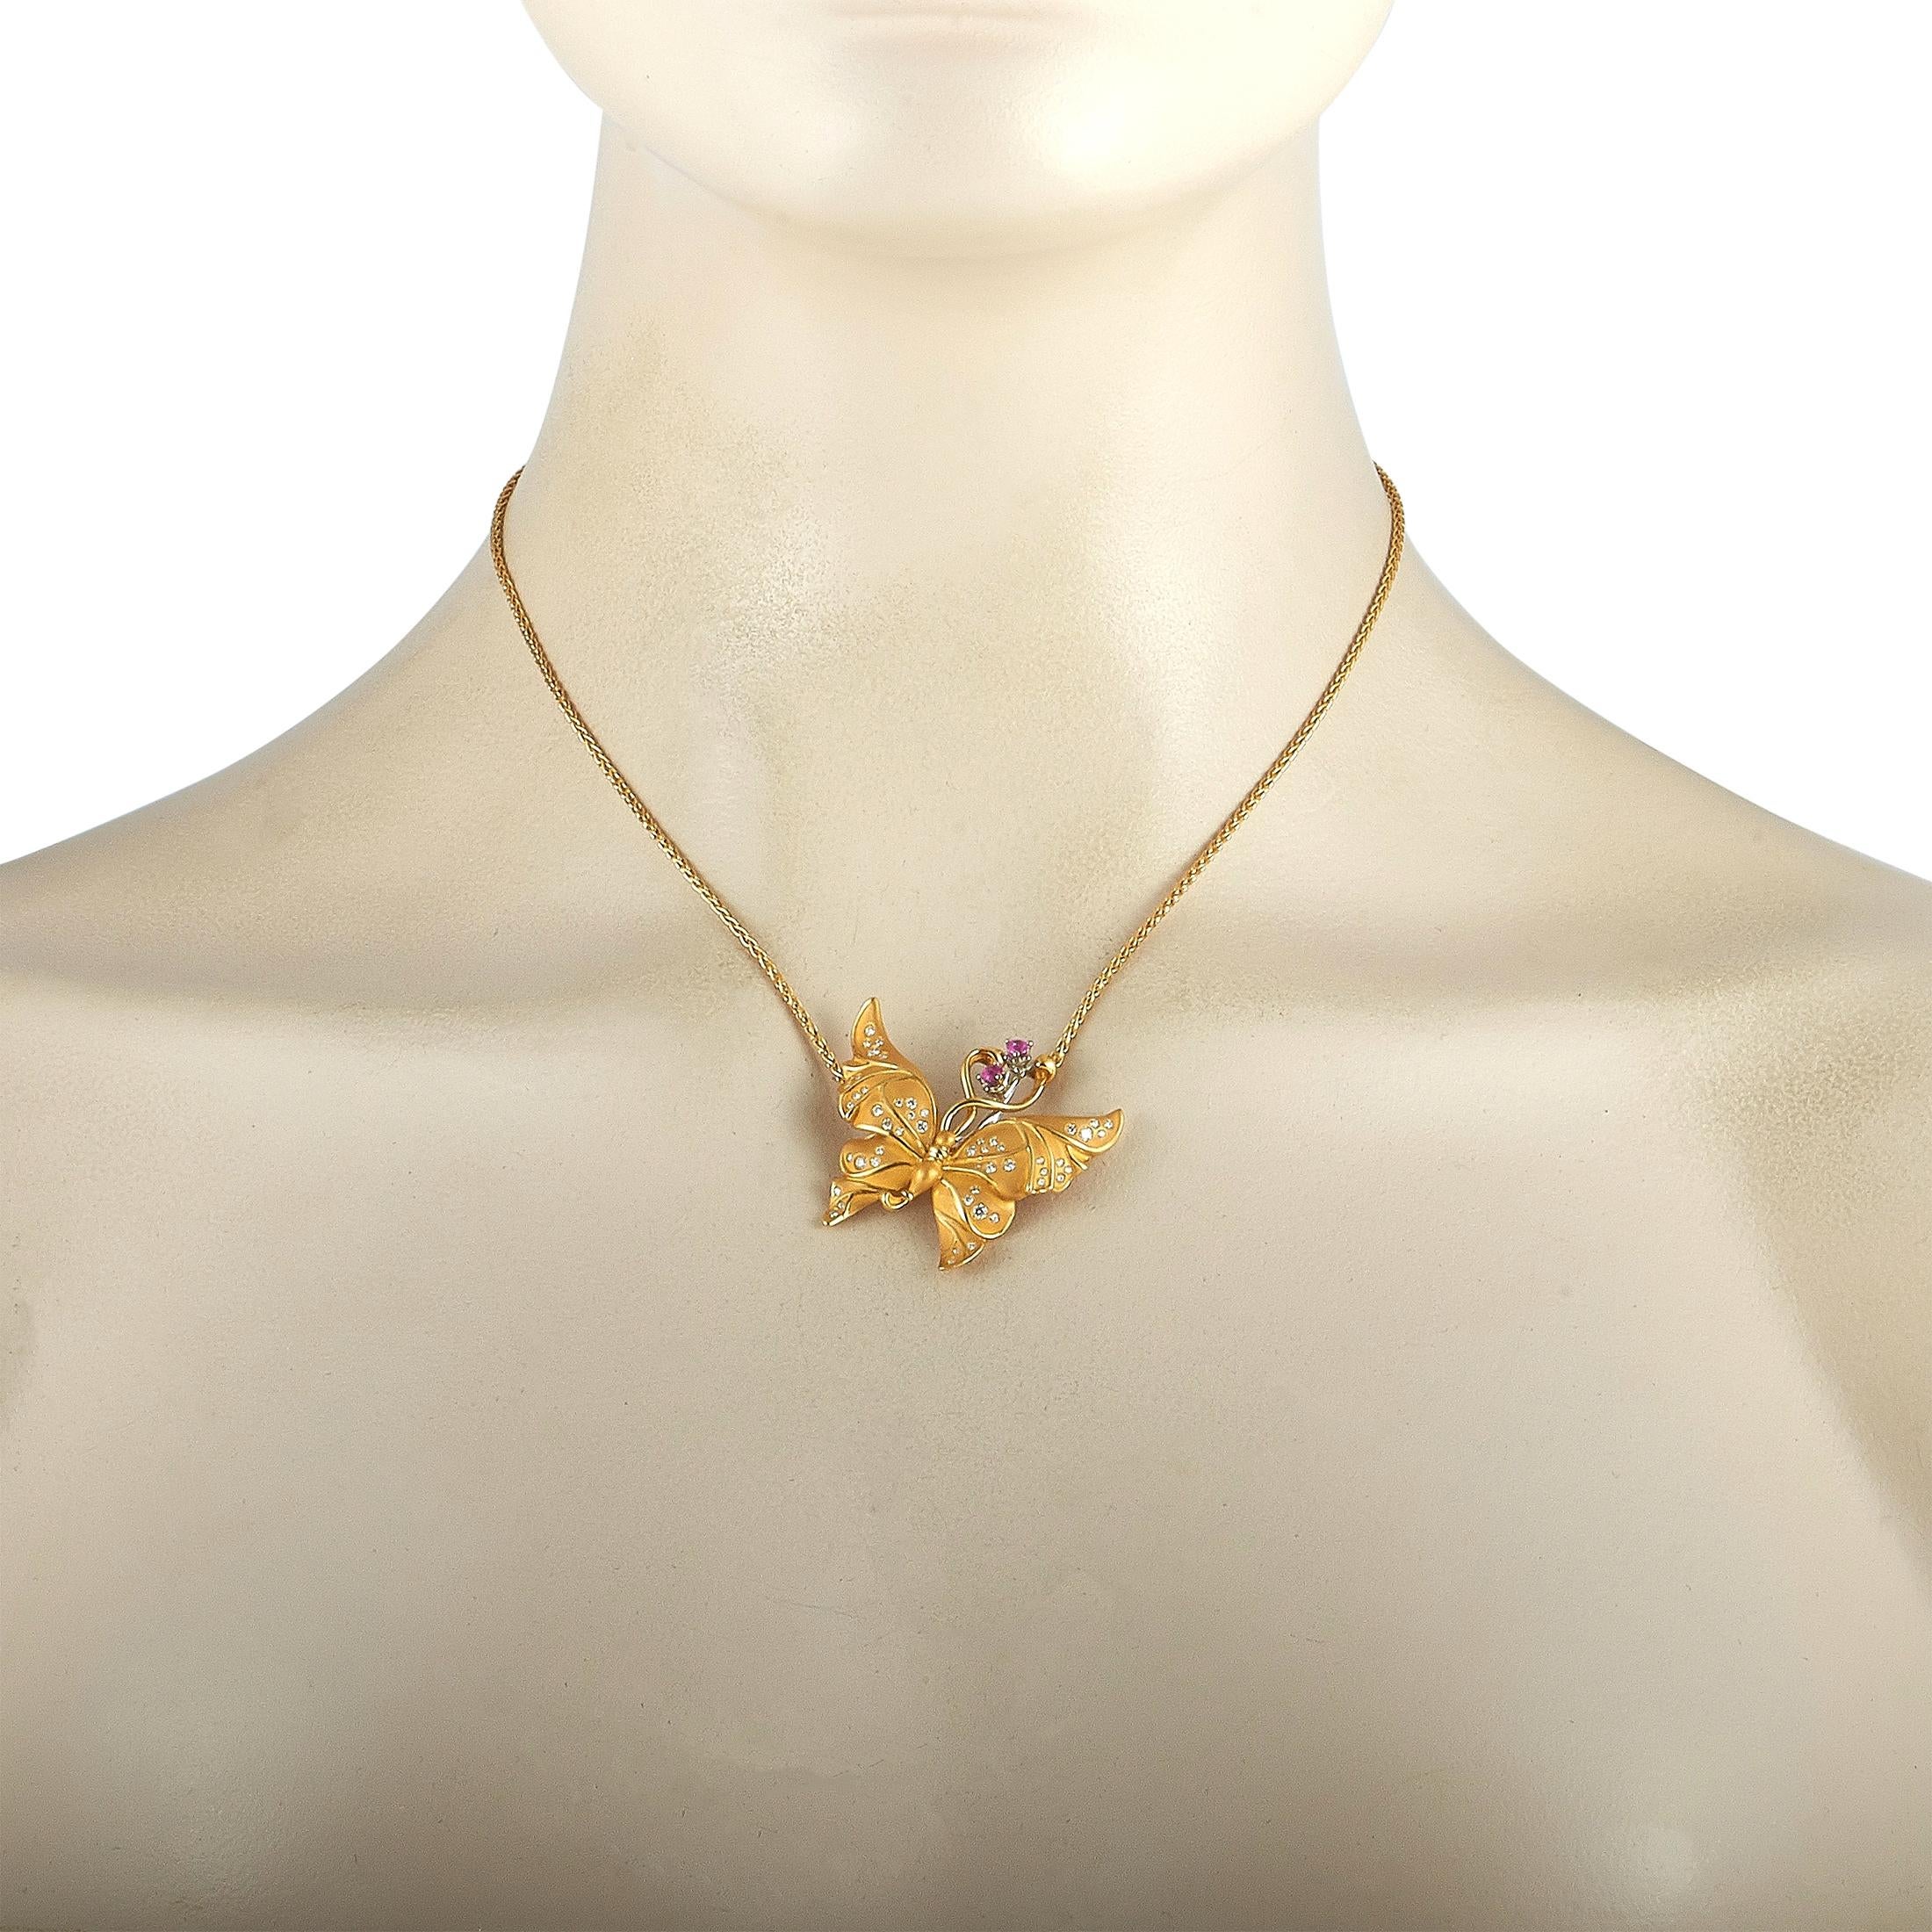 This Carrera y Carrera necklace is made of 18K yellow gold and embellished with diamonds and sapphires that total 0.50 and 0.40 carats respectively. The necklace weighs 16.5 grams and is presented with a 16” chain, boasting a butterfly pendant that